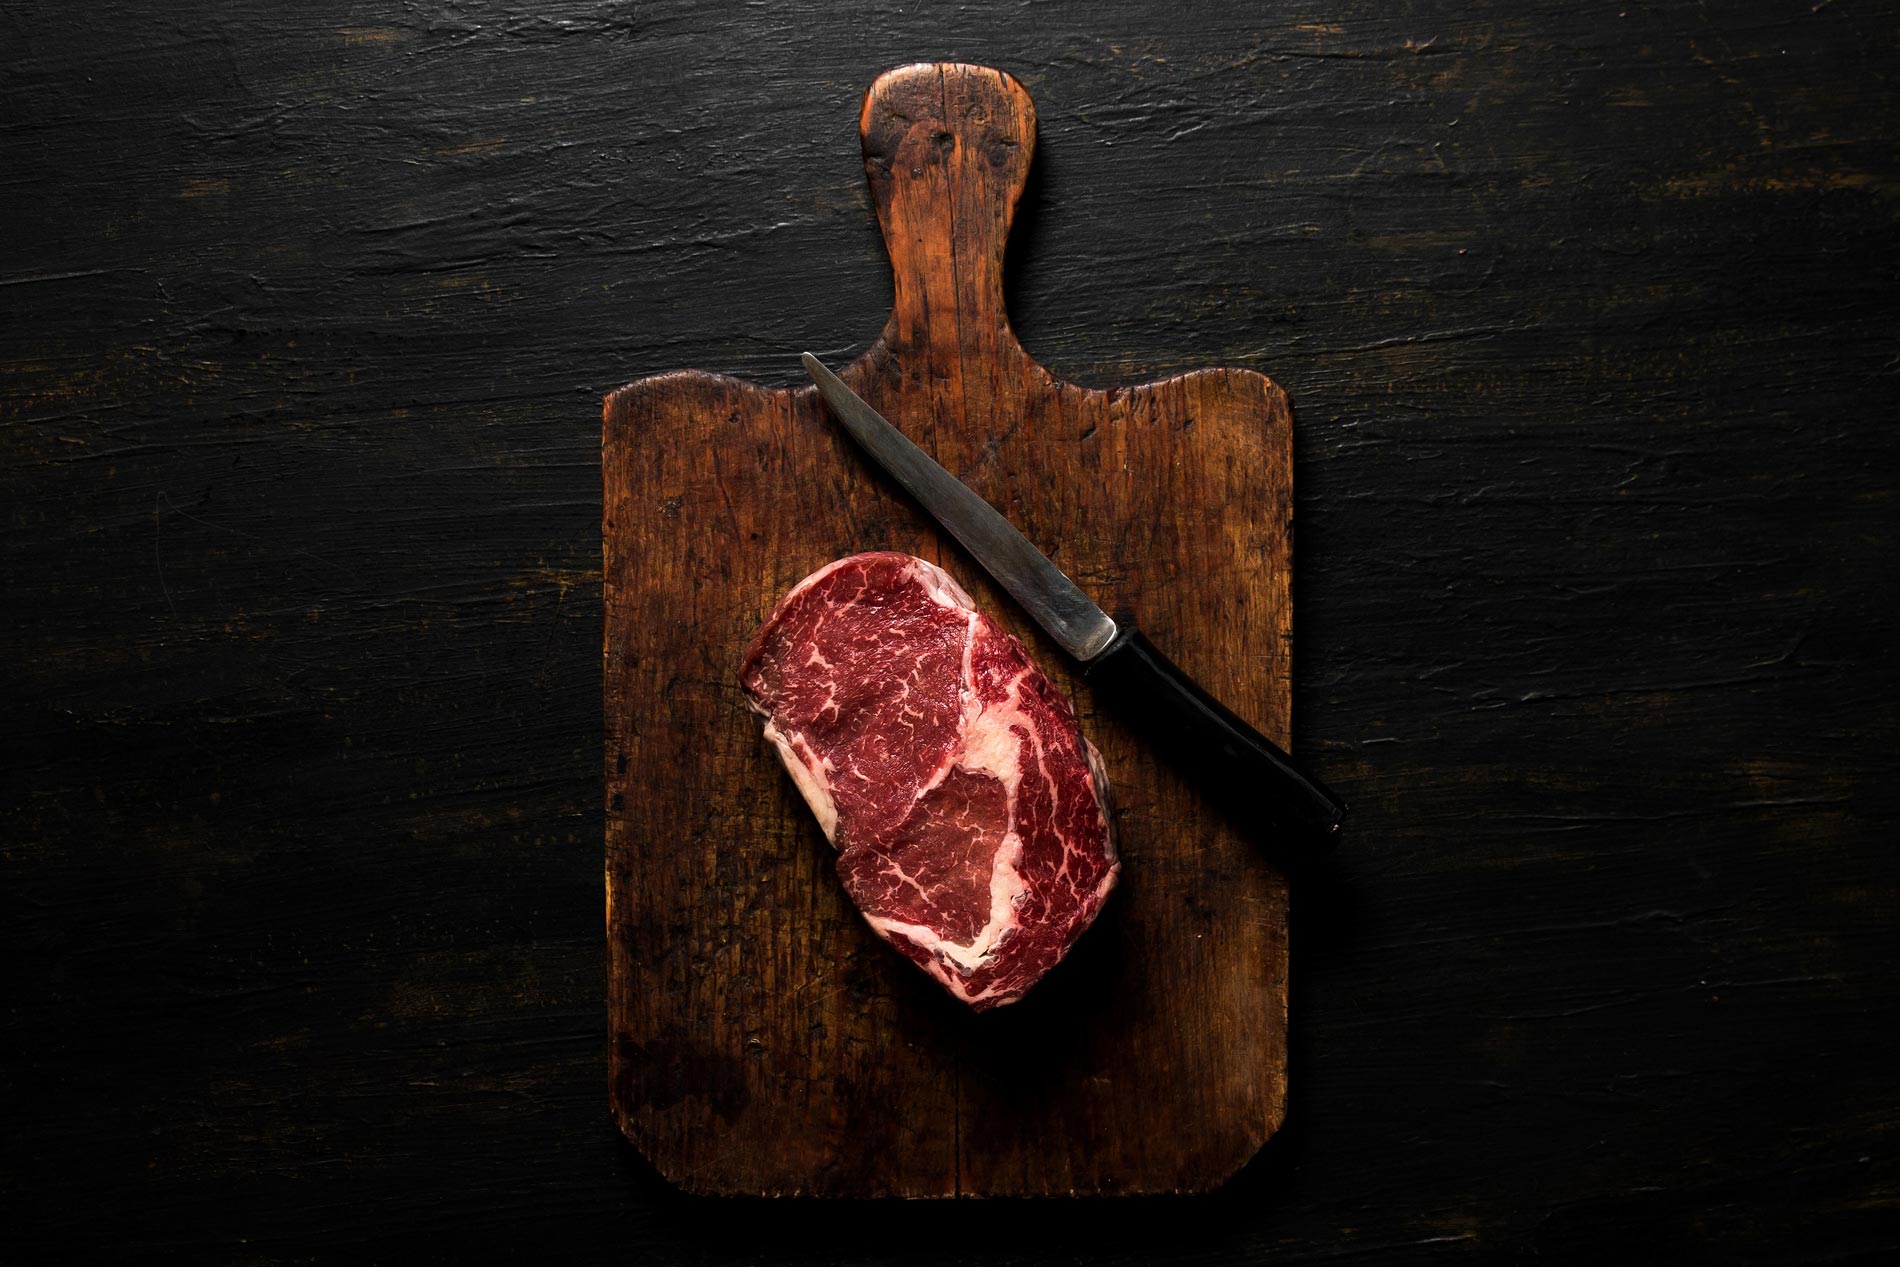 Butcher's Guide: What are Butcher's Cut Steaks?